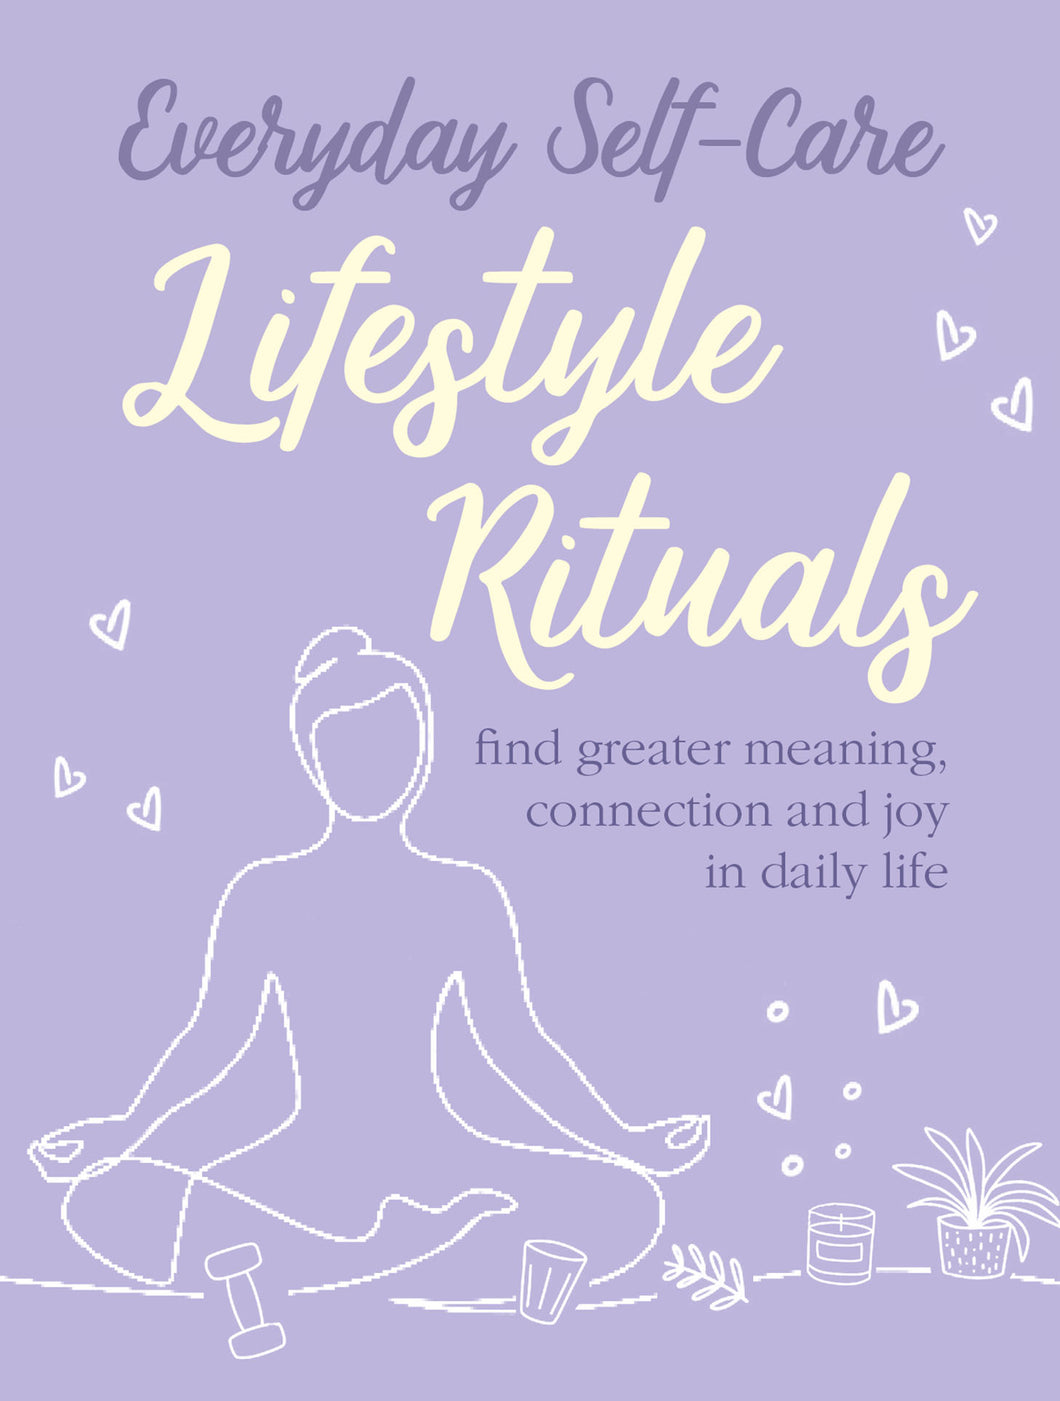 Everyday Self-care: Lifestyle Rituals